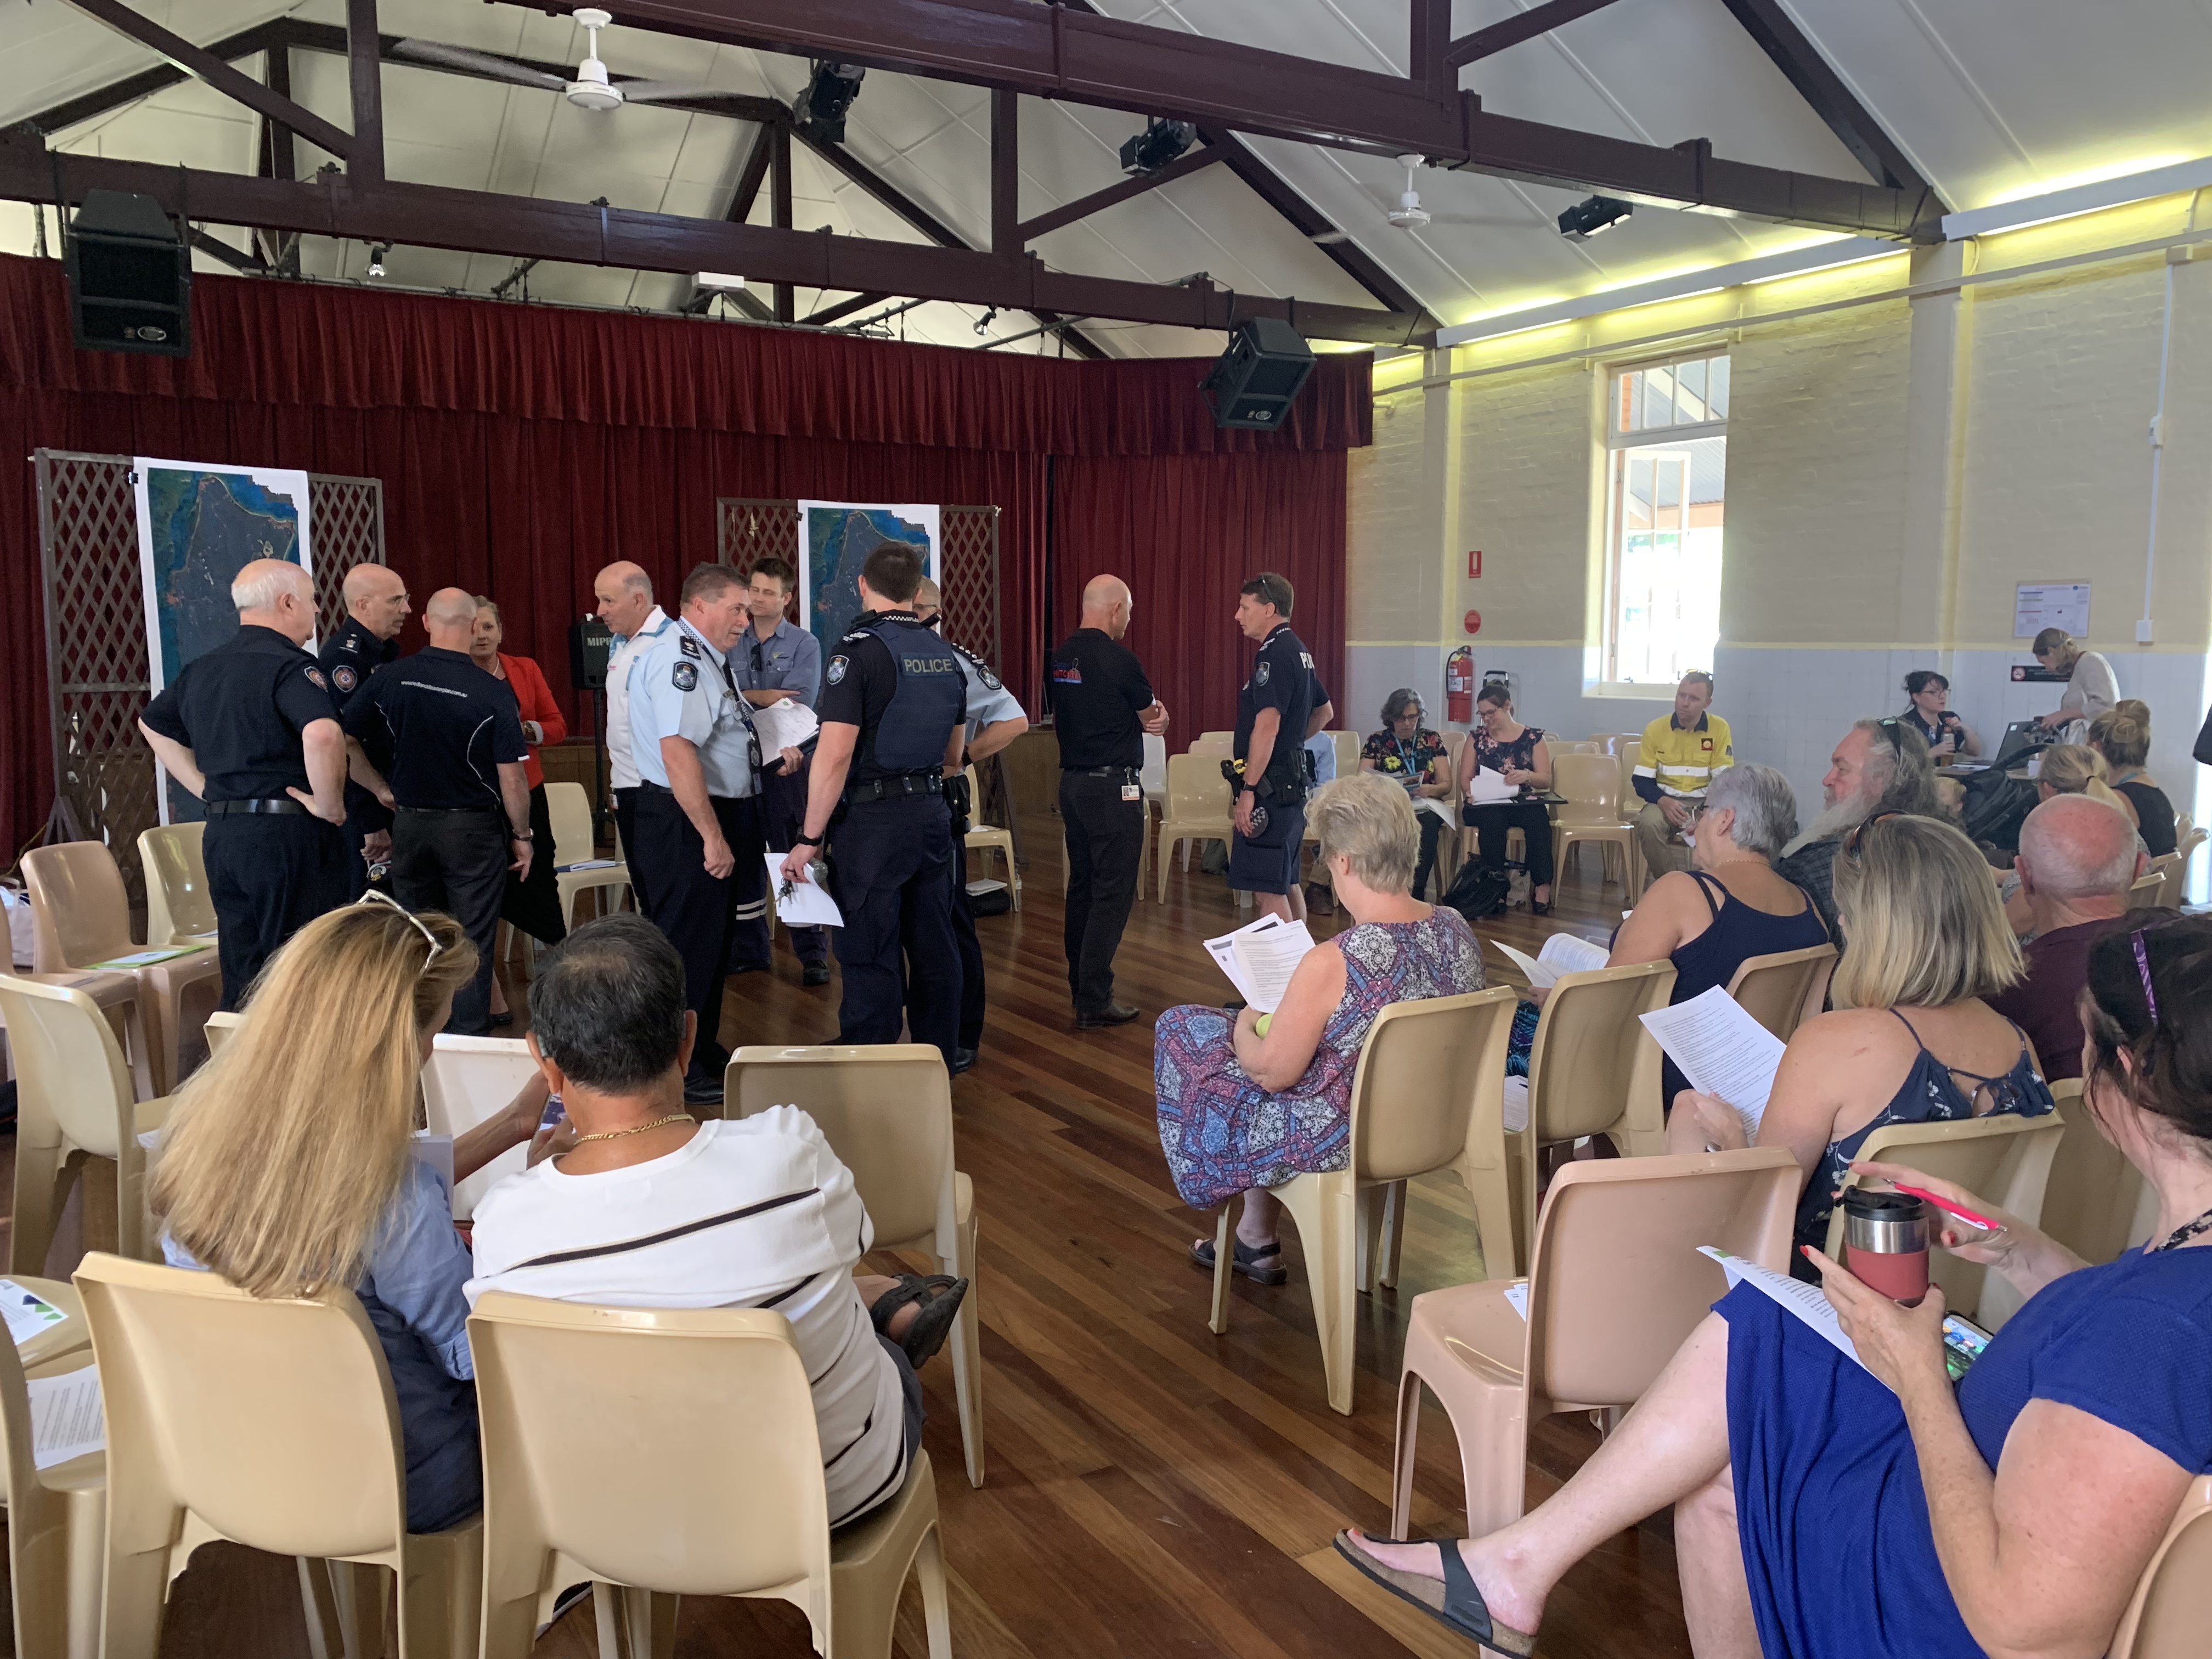 More than 60 residents attended the community meeting at Dunwich this afternoon to find out the latest information about the fire on North Stradbroke Island.